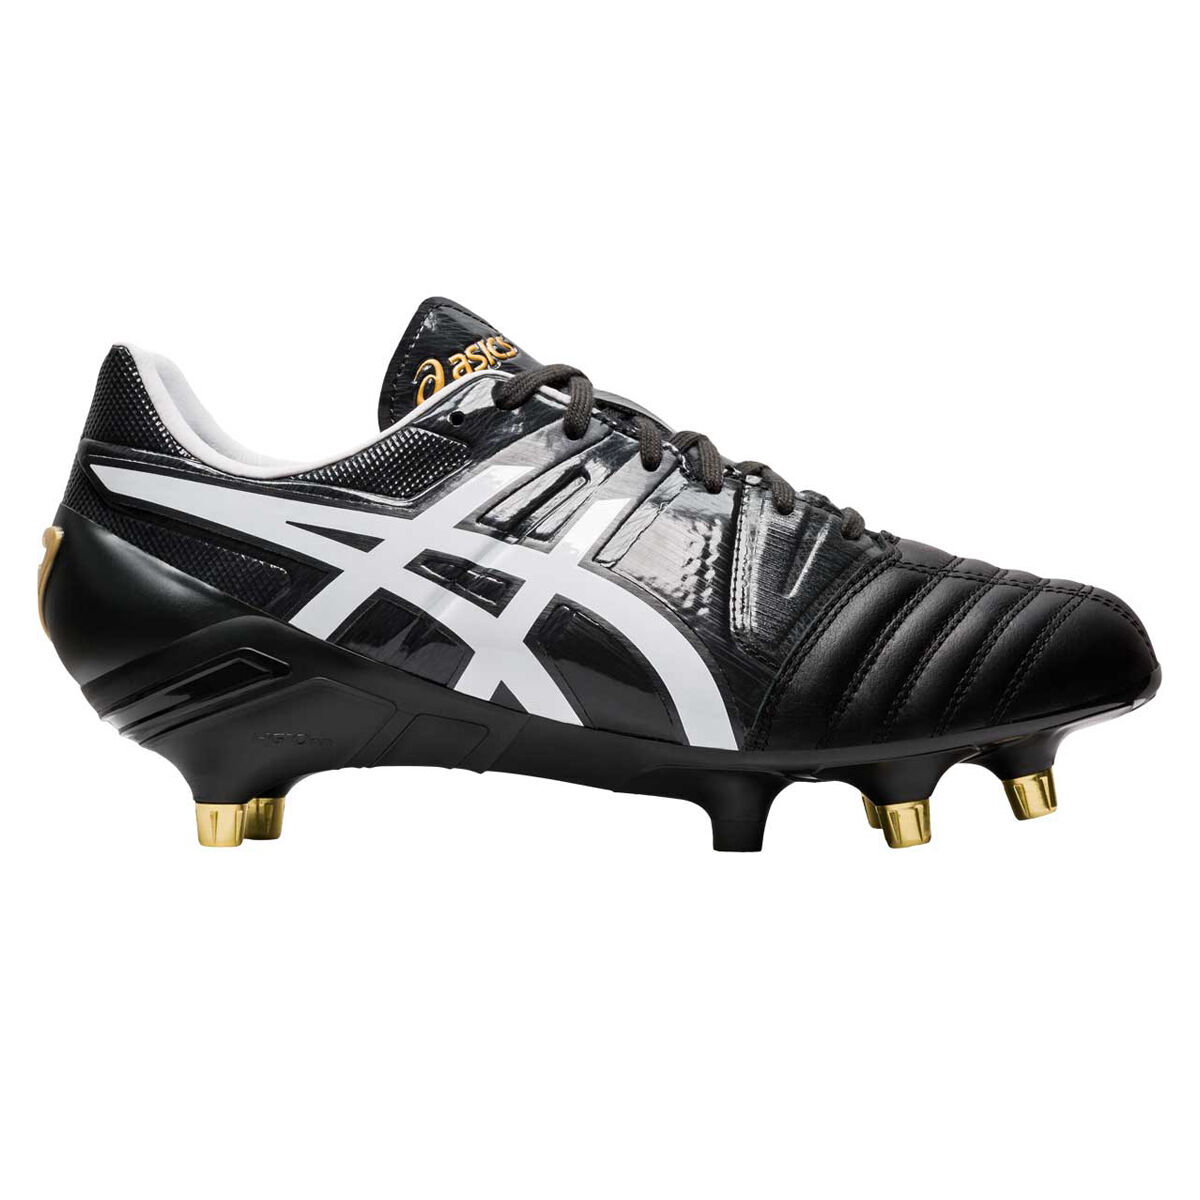 asics gel lethal rugby boots,OFF 71 